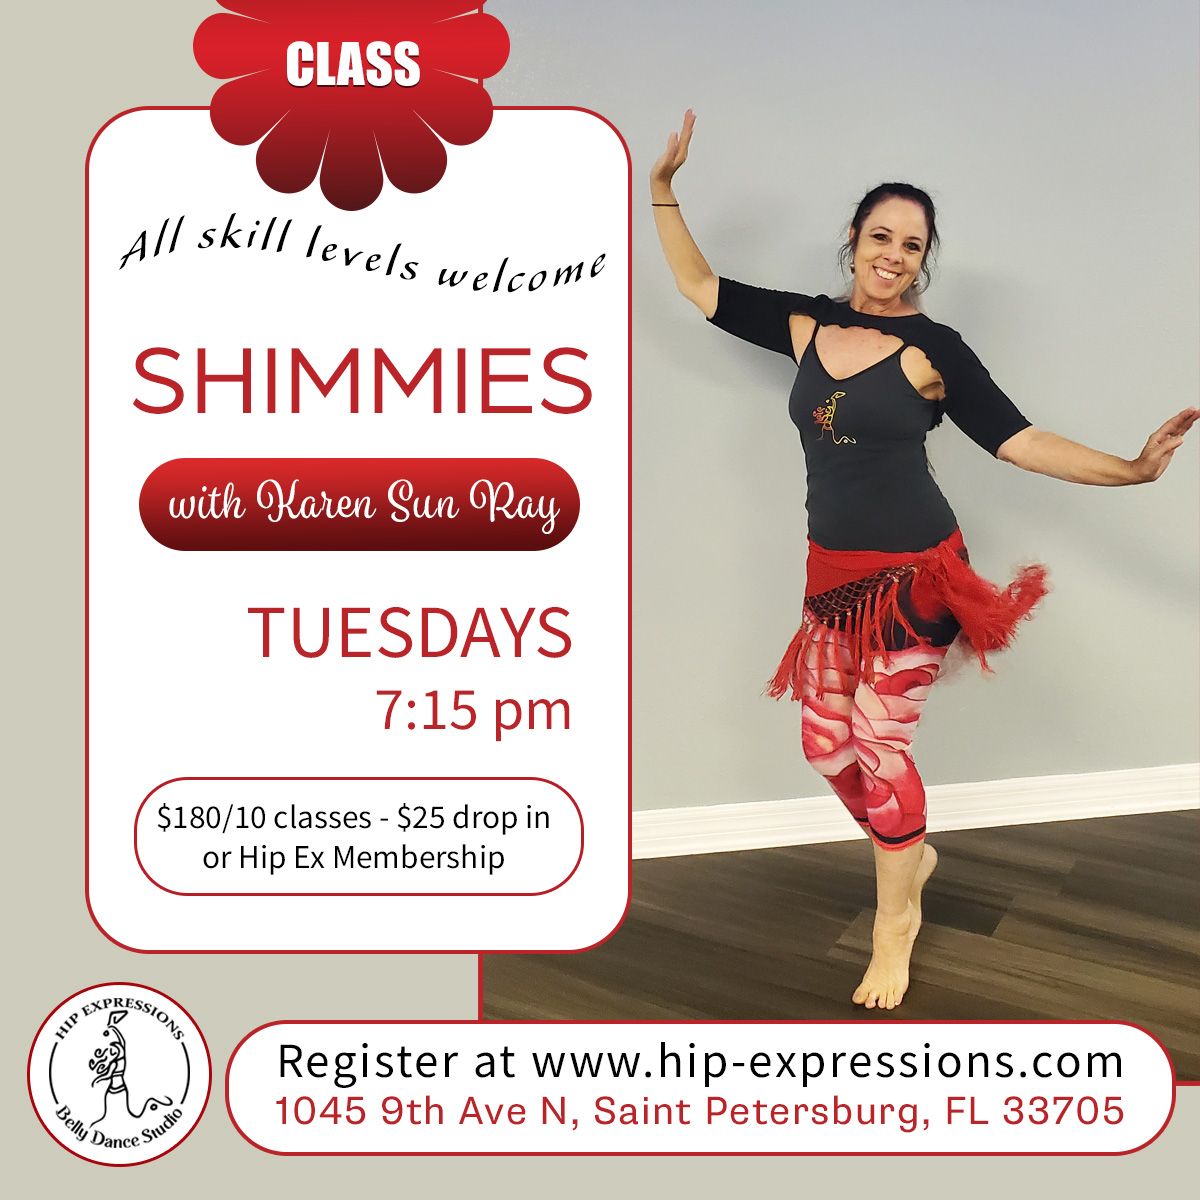 Shimmies with Karen Sun Ray | Tuesdays at 7:15 pm | Hip Expressions